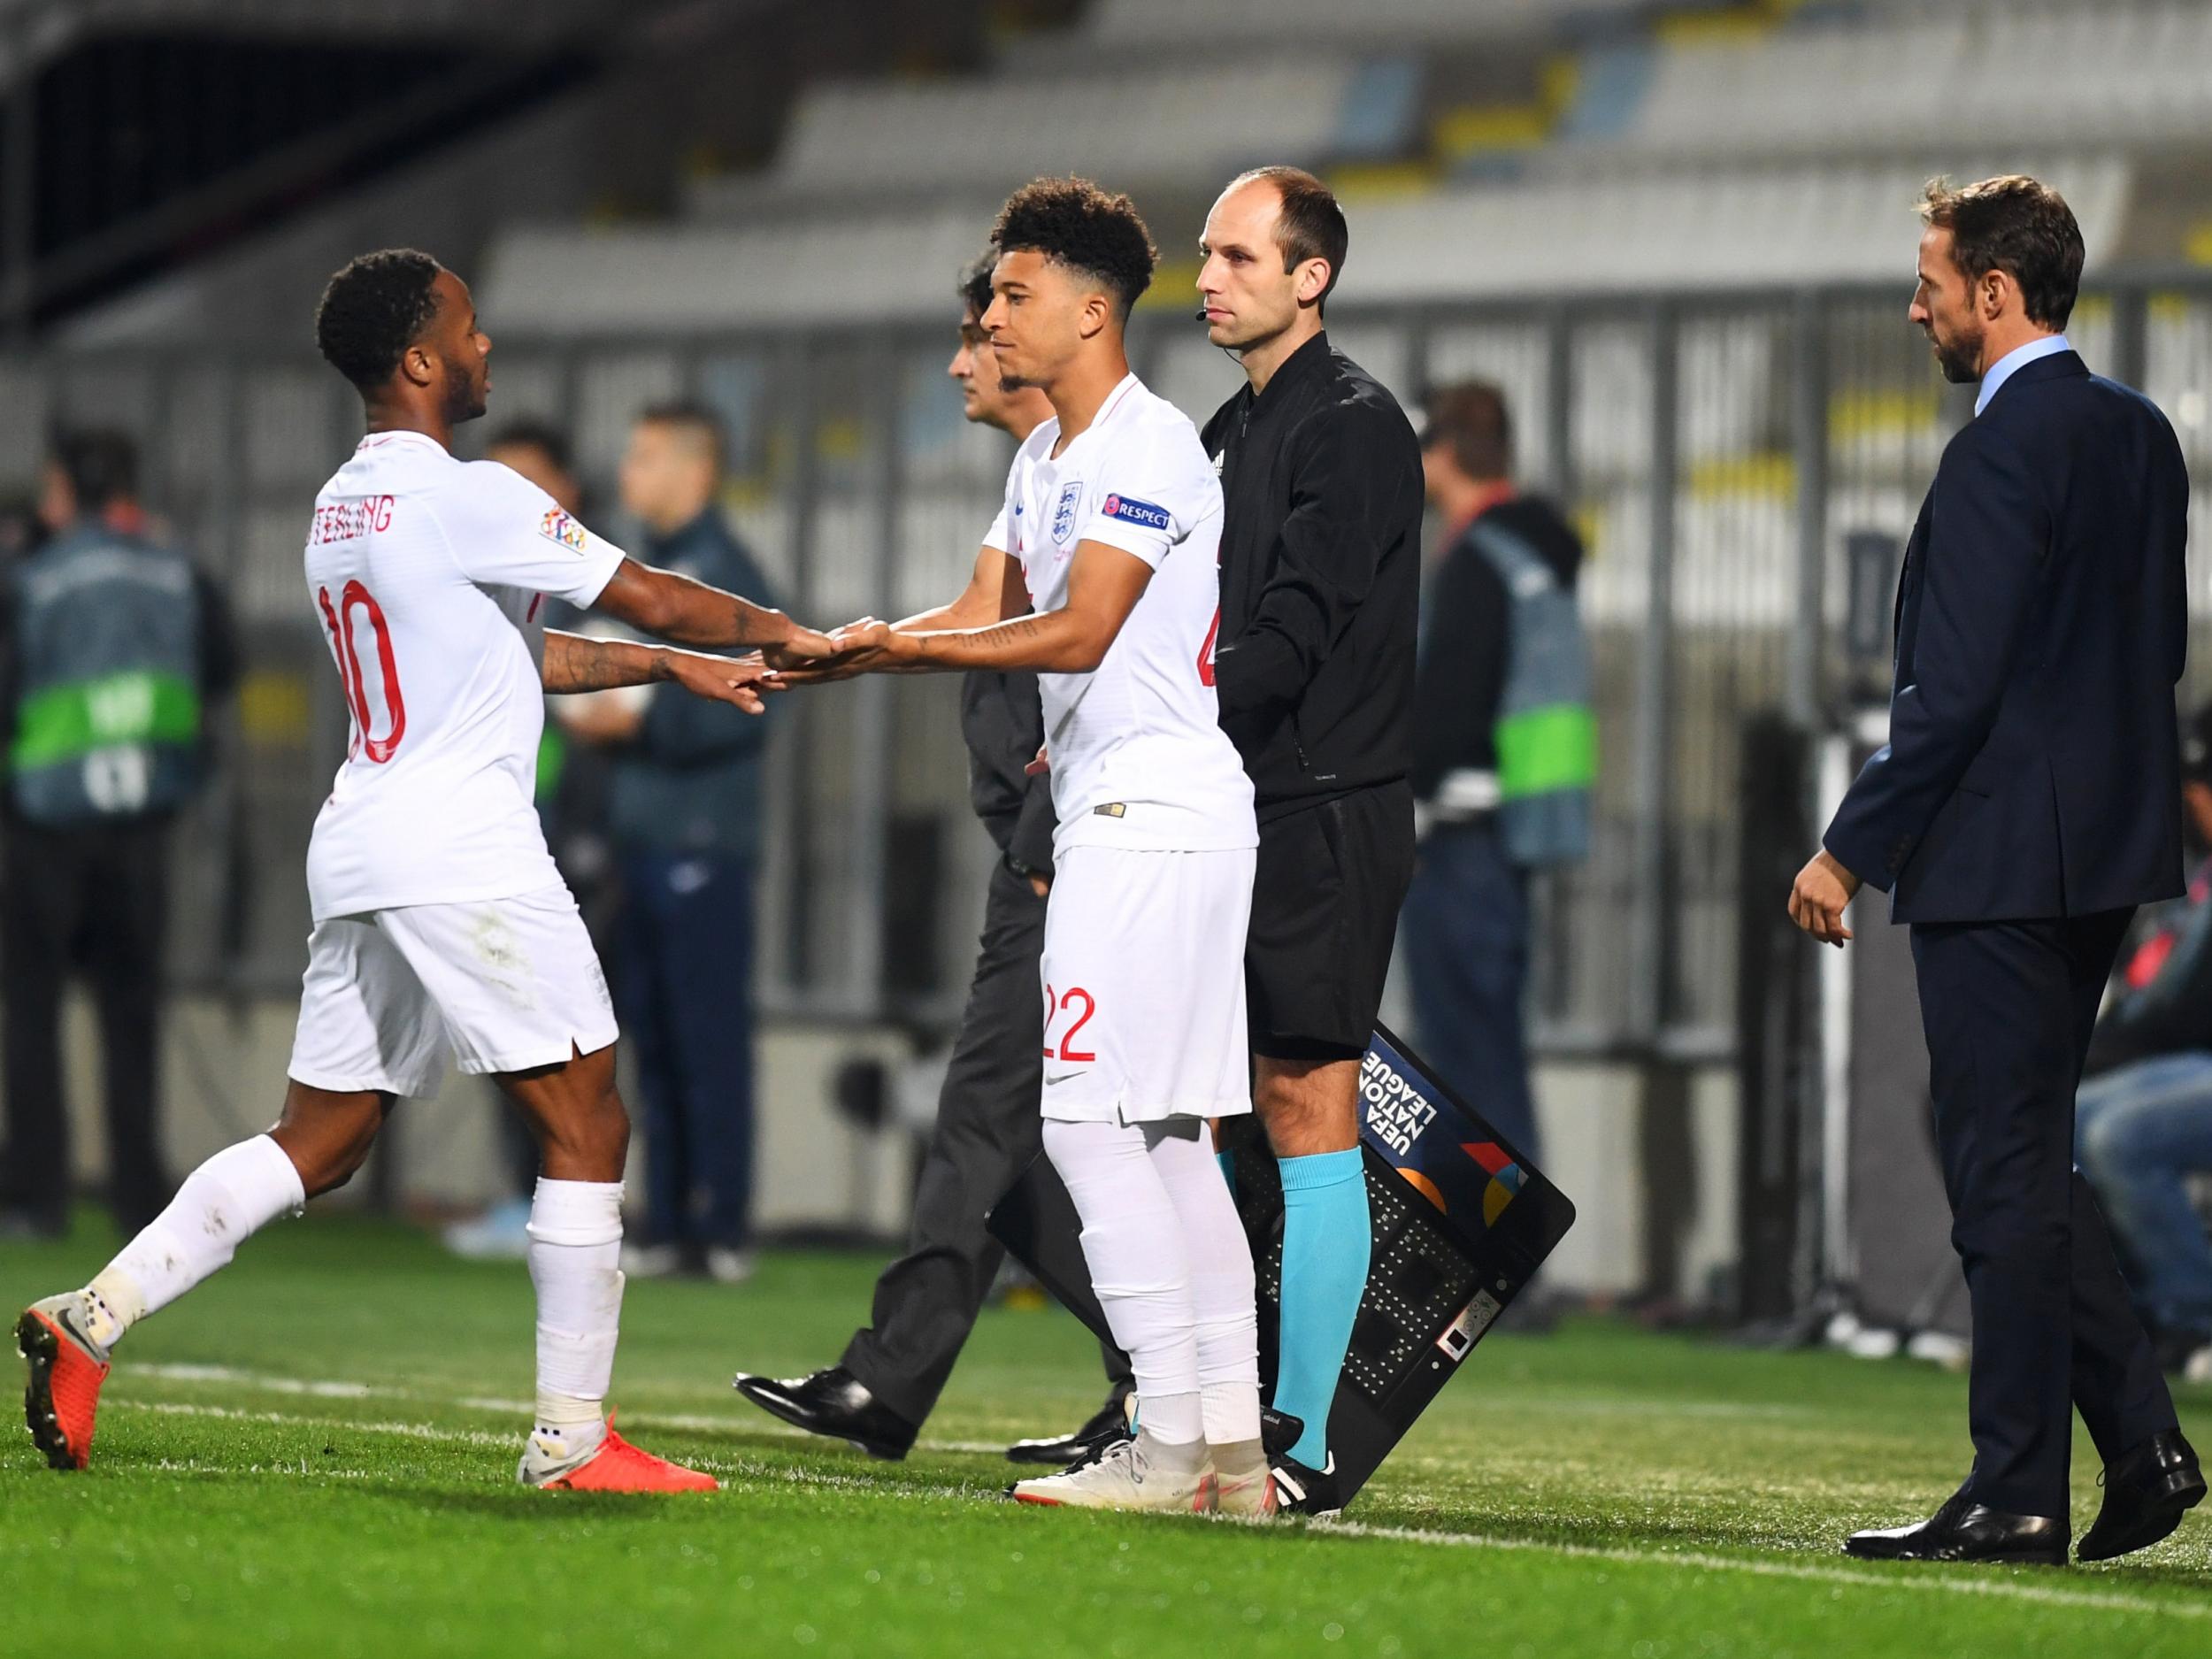 Jadon Sancho made his first senior England appearance after replacing Raheem Sterling